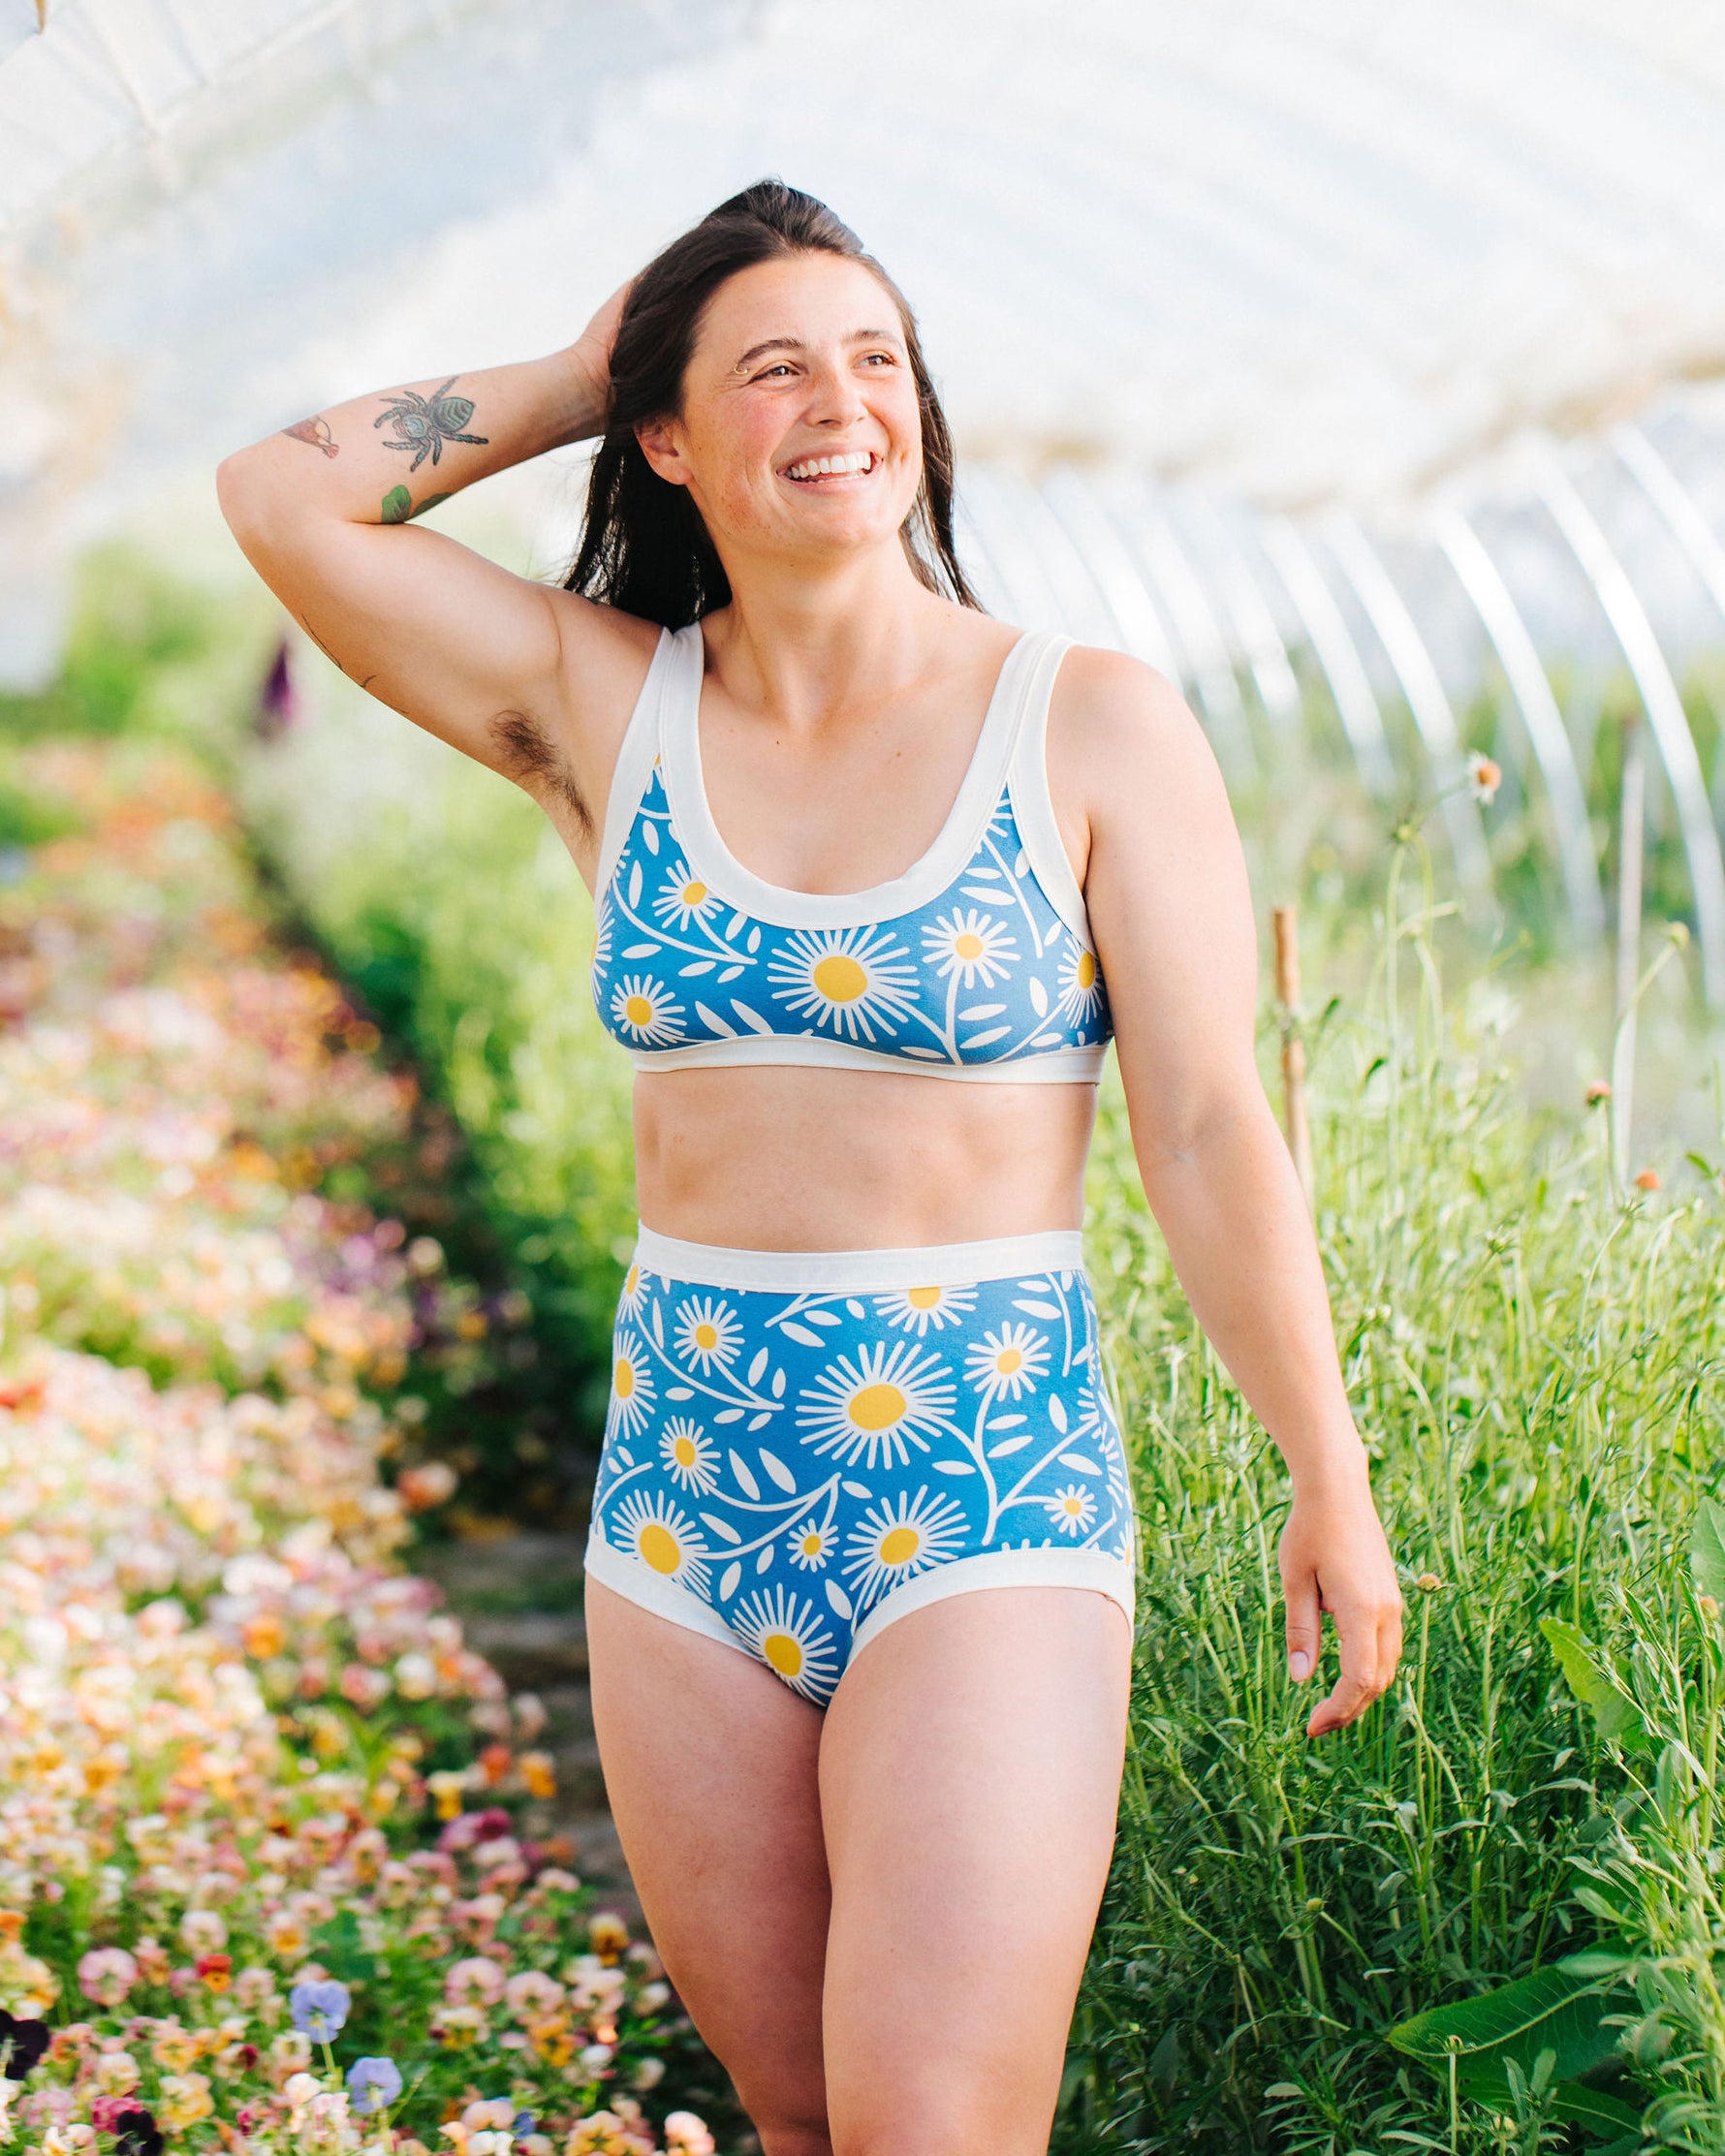 Model is smiling in a field wearing Thunderpants Sky Rise style underwear and a Bralette in Daisy Days print: blue with white and yellow daisies.